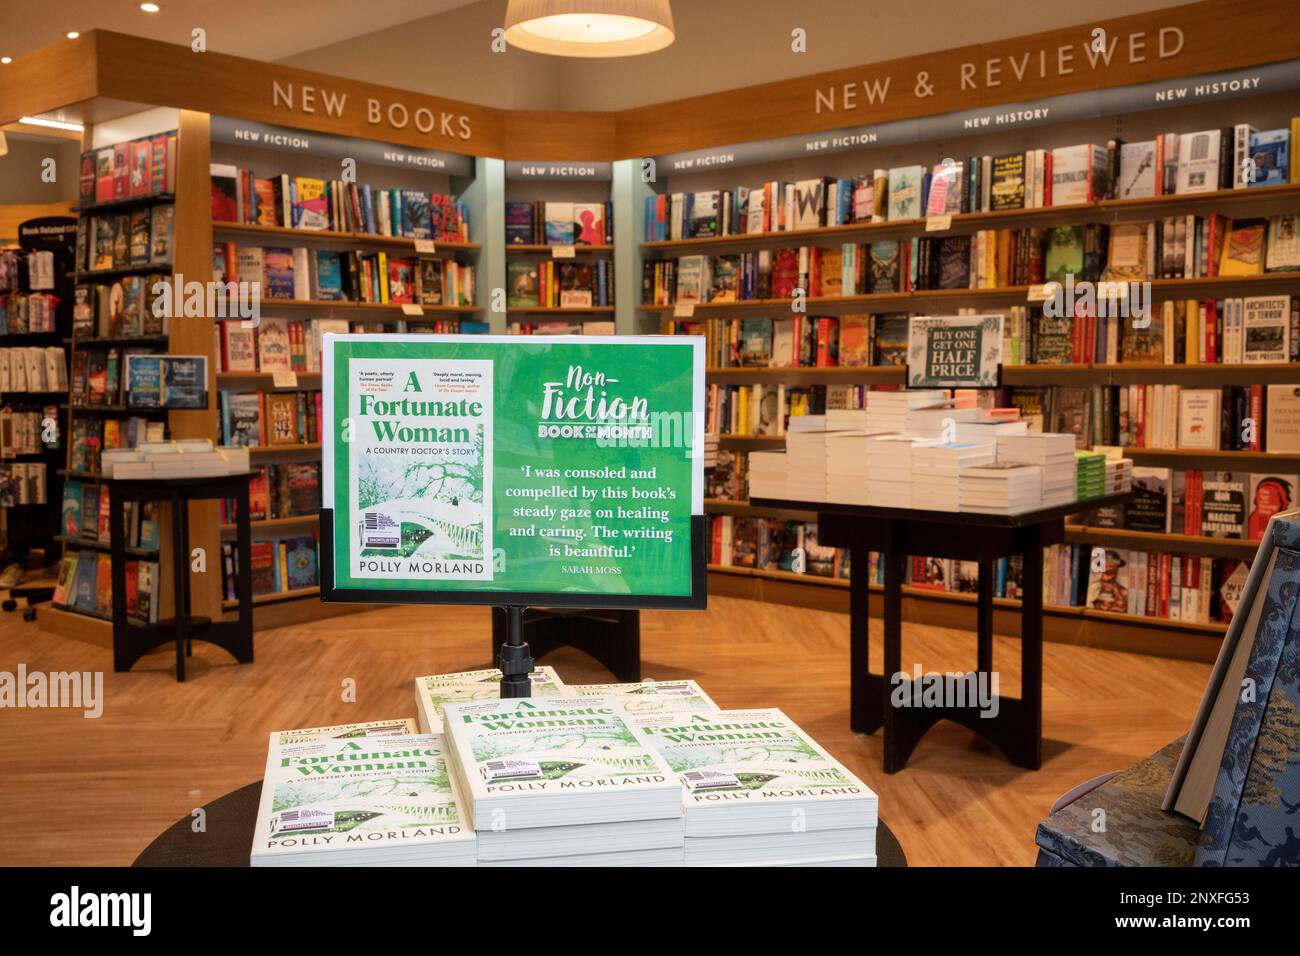 A display showing bookseller Waterstones's non-fiction Book of the Month which for March 2023 is 'A Fortunate Woman: A Country Doctor's Story' by author Polly Morland, at the retailer's Victoria branch, on 1st March 2023, in London, England. Stock Photo